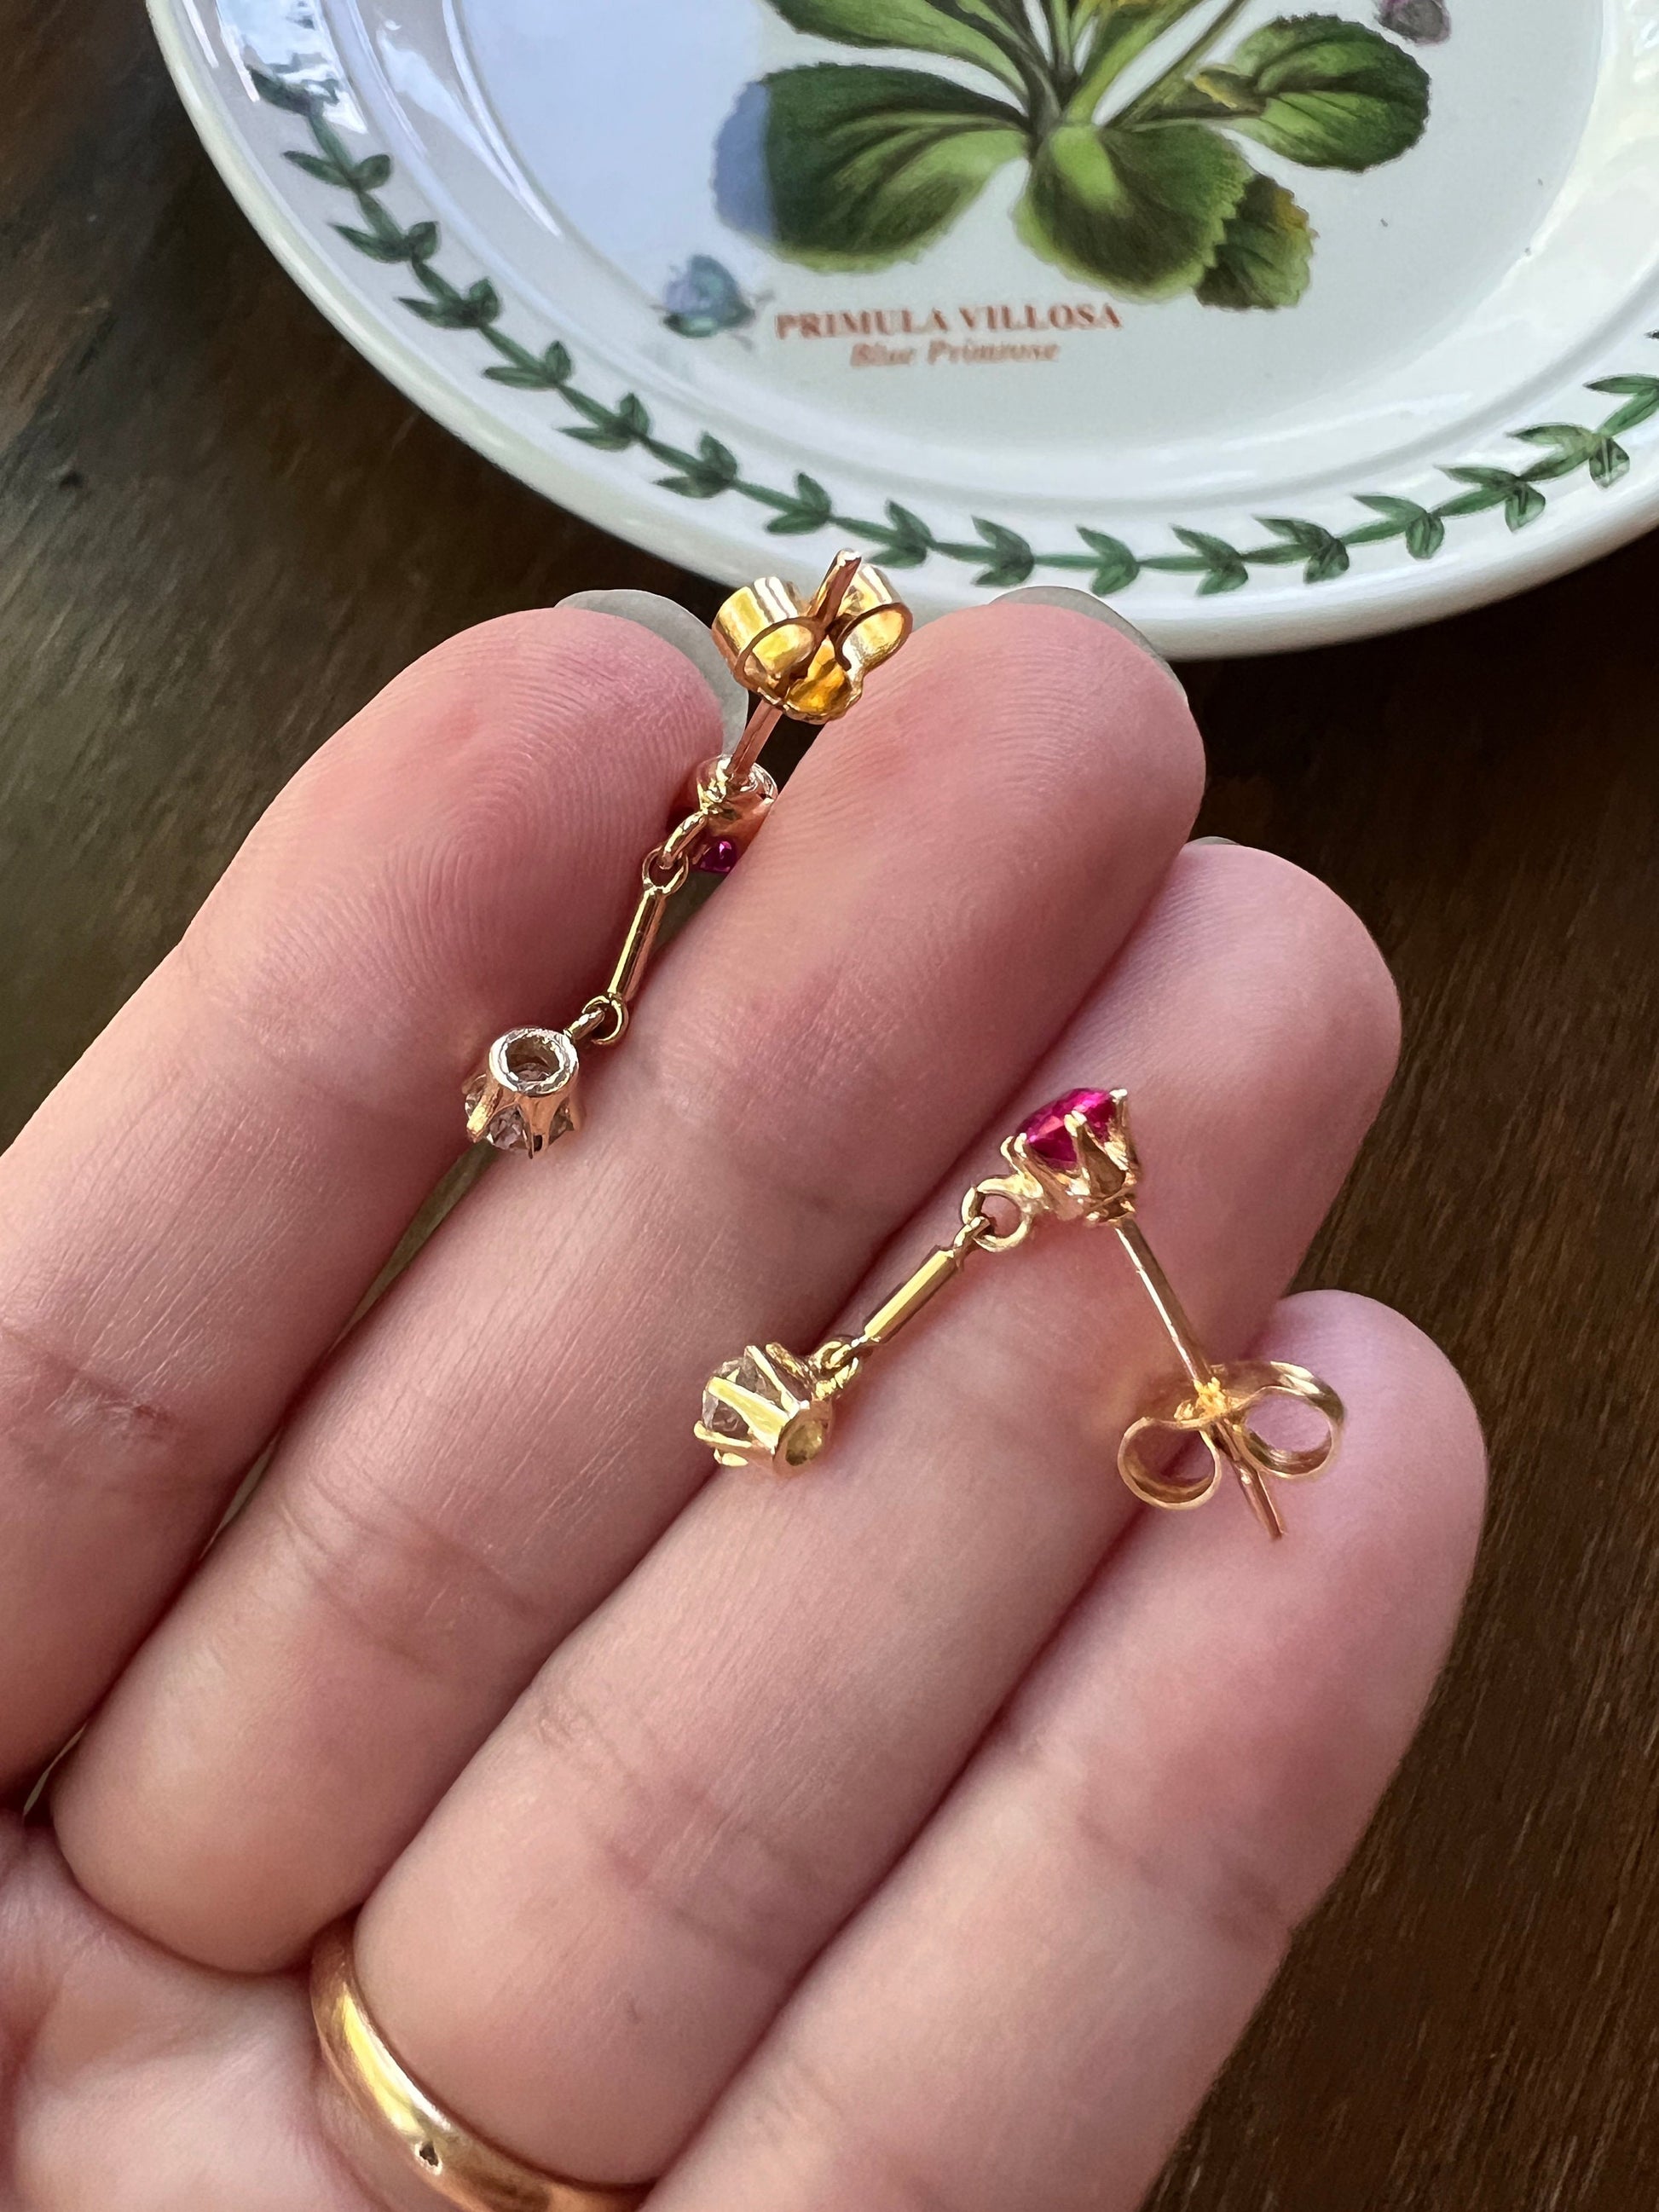 RUBY .6 Carat Old Mine Cut DIAMOND EARRINGS ANTiQUE 18k Gold Linear Dangle Dormeuse Victorian Pink Red .6Ctw Something Old Romantic Gift OmC